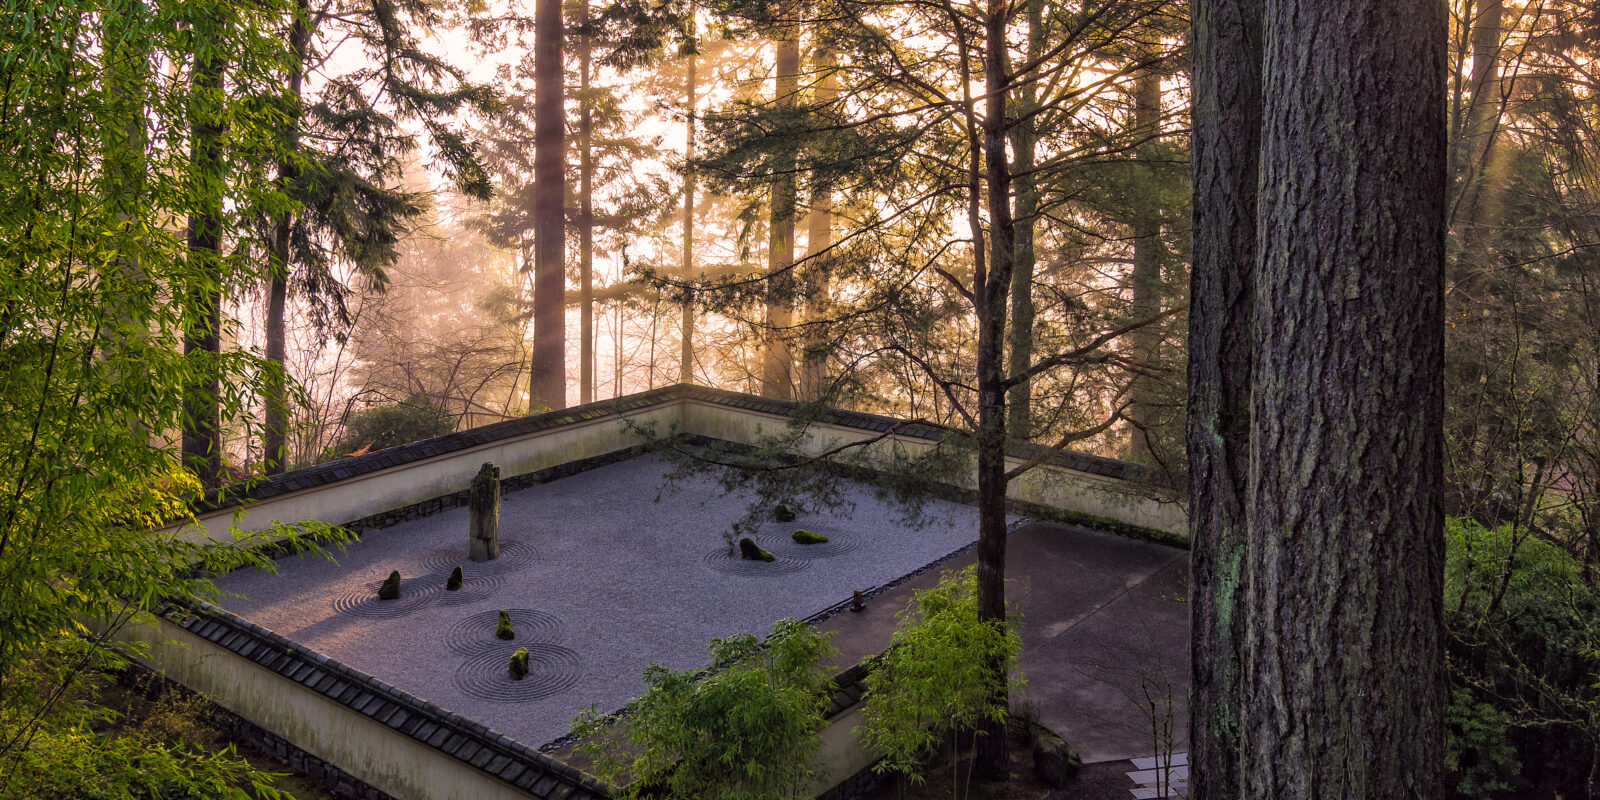 Overlooking the Sand and Stone Garden in the Morning. Photo by Roman Johnston